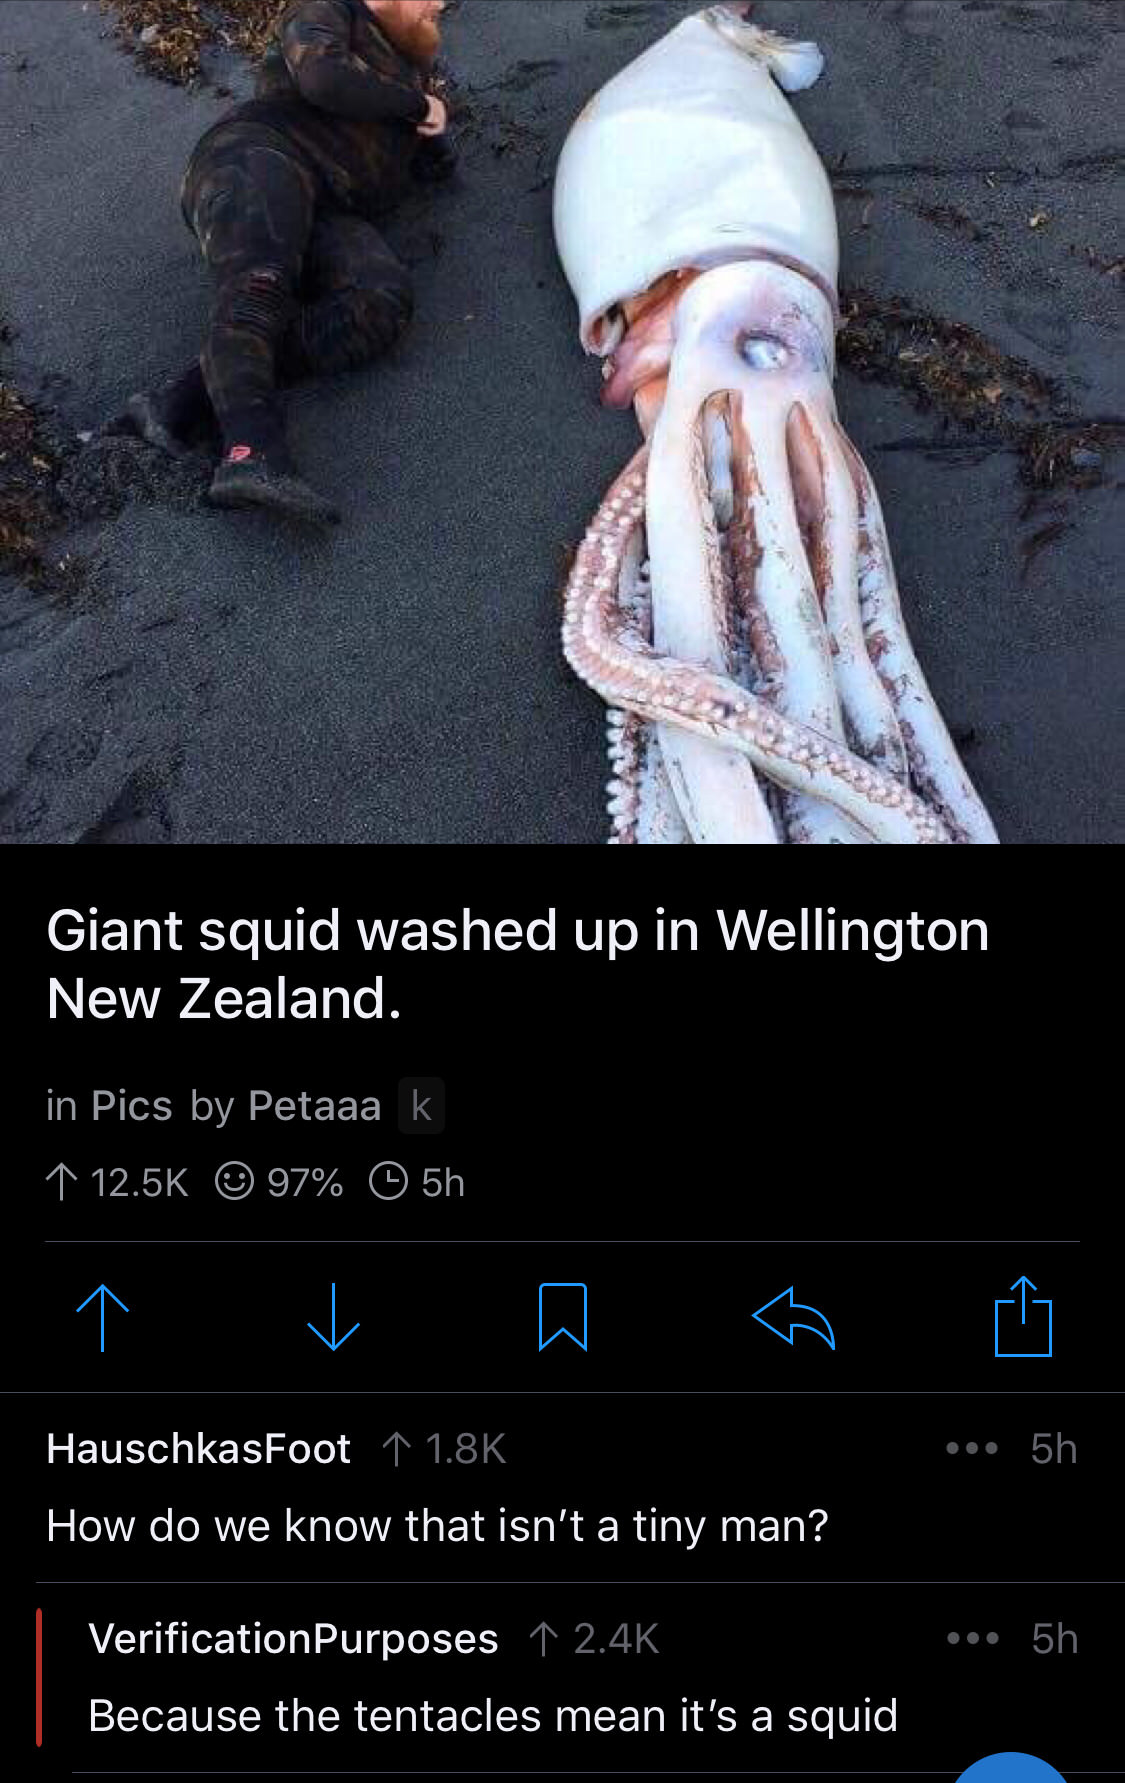 giant squid nz - Giant squid washed up in Wellington New Zealand. 'in Pics by Petaaa k 1 97% 5h v T Q ... 5h HauschkasFoot 1 How do we know that isn't a tiny man? ... 5h Verification Purposes 1 Because the tentacles mean it's a squid